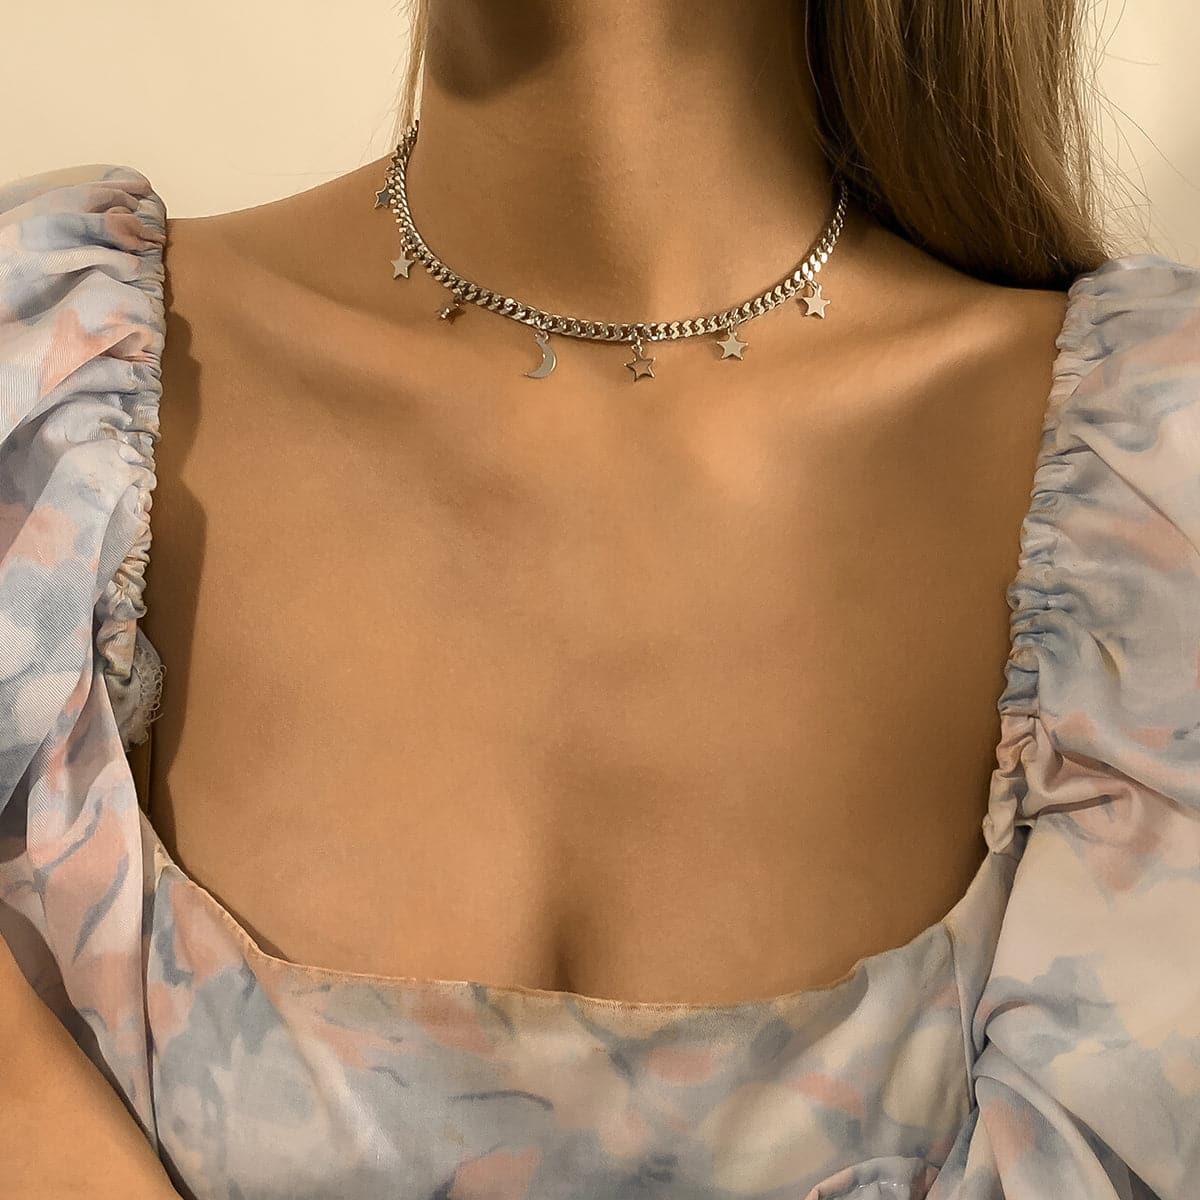 Silver-Plated Celestial Station Choker Necklace